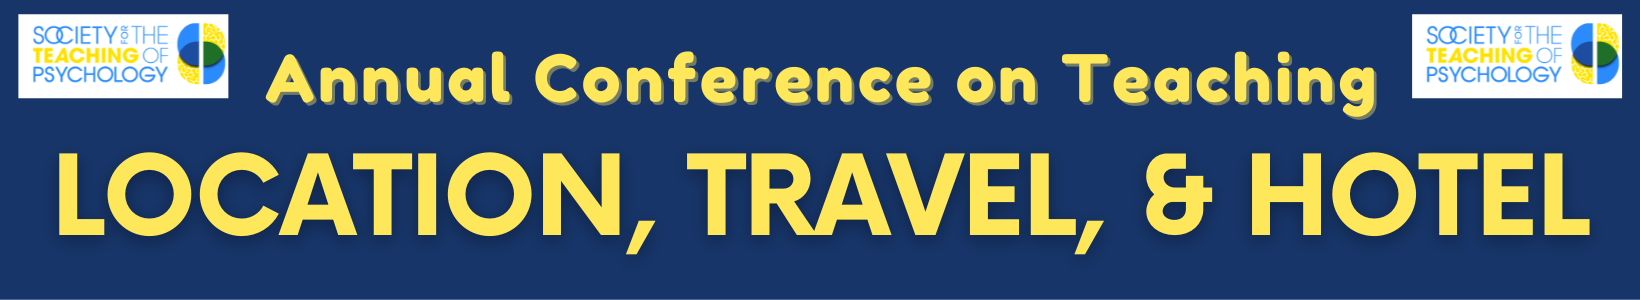 Annual Conference on Teaching Location, Travel, & Hotel